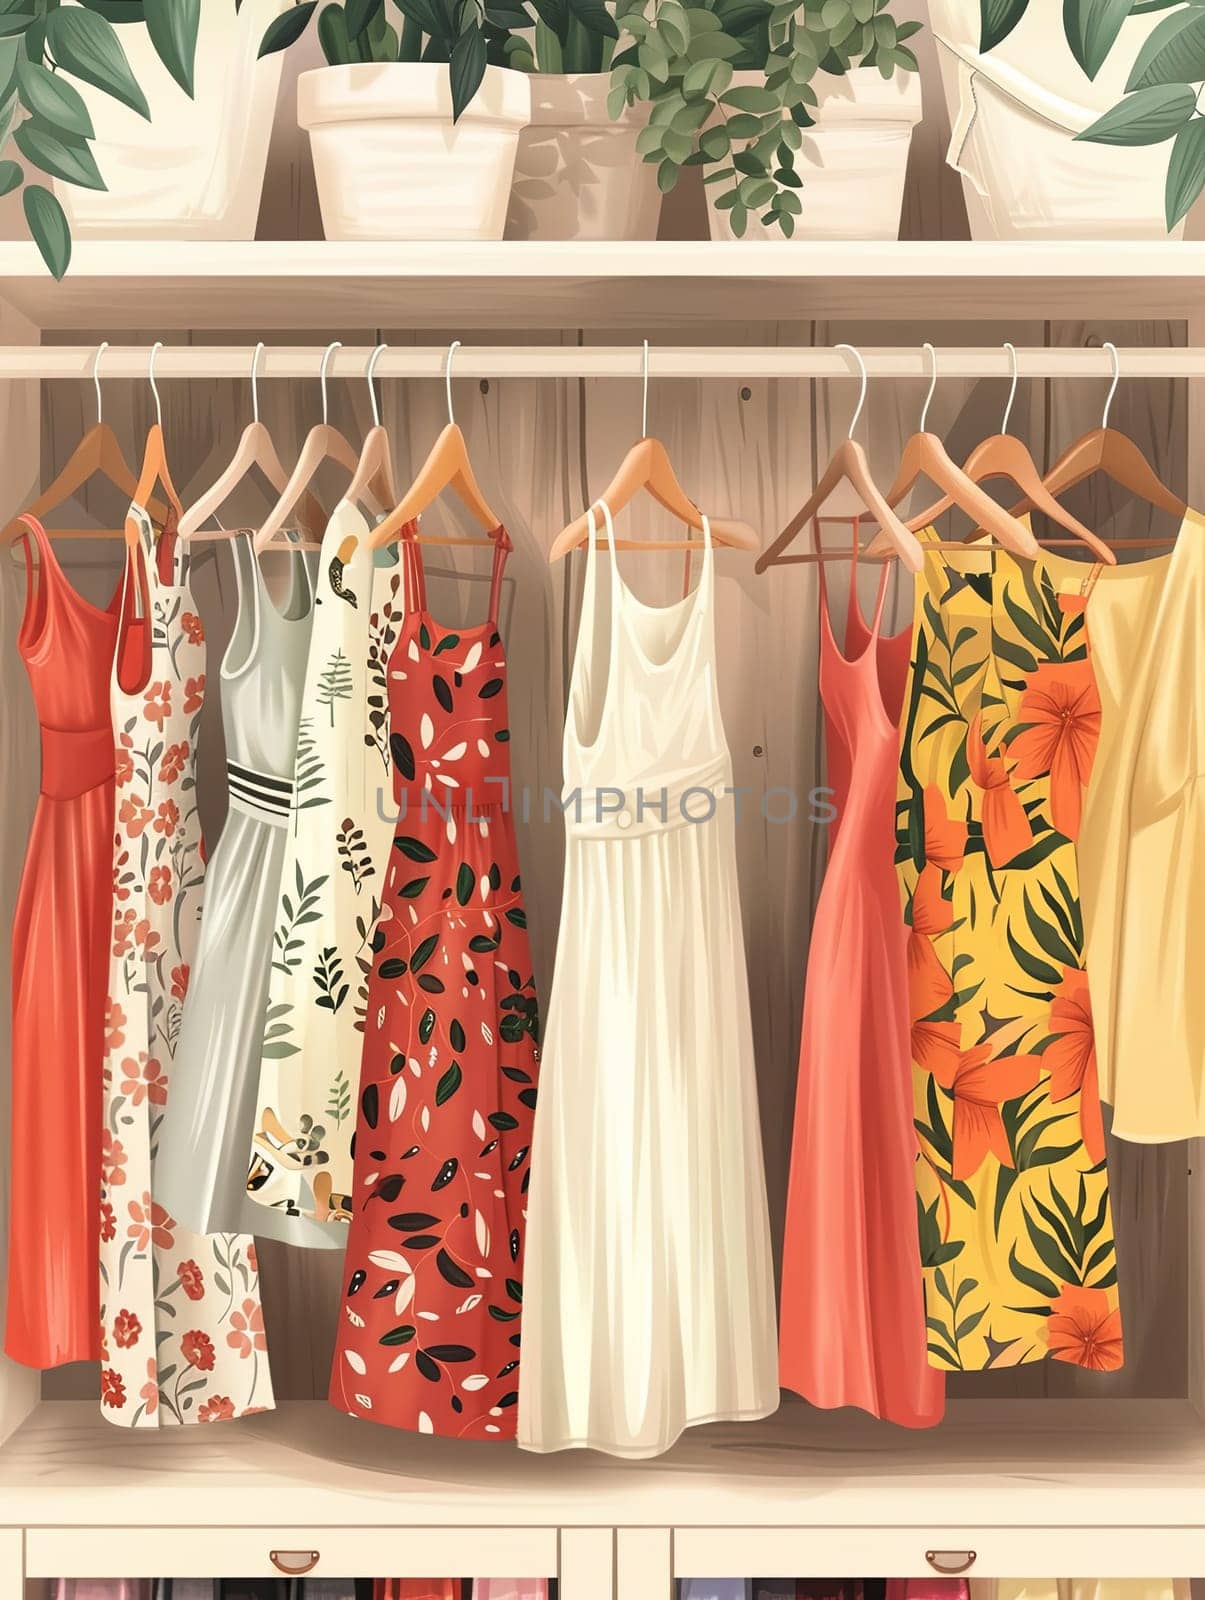 Collection of stylish dresses hanging on a rack in a trendy womenswear showroom.